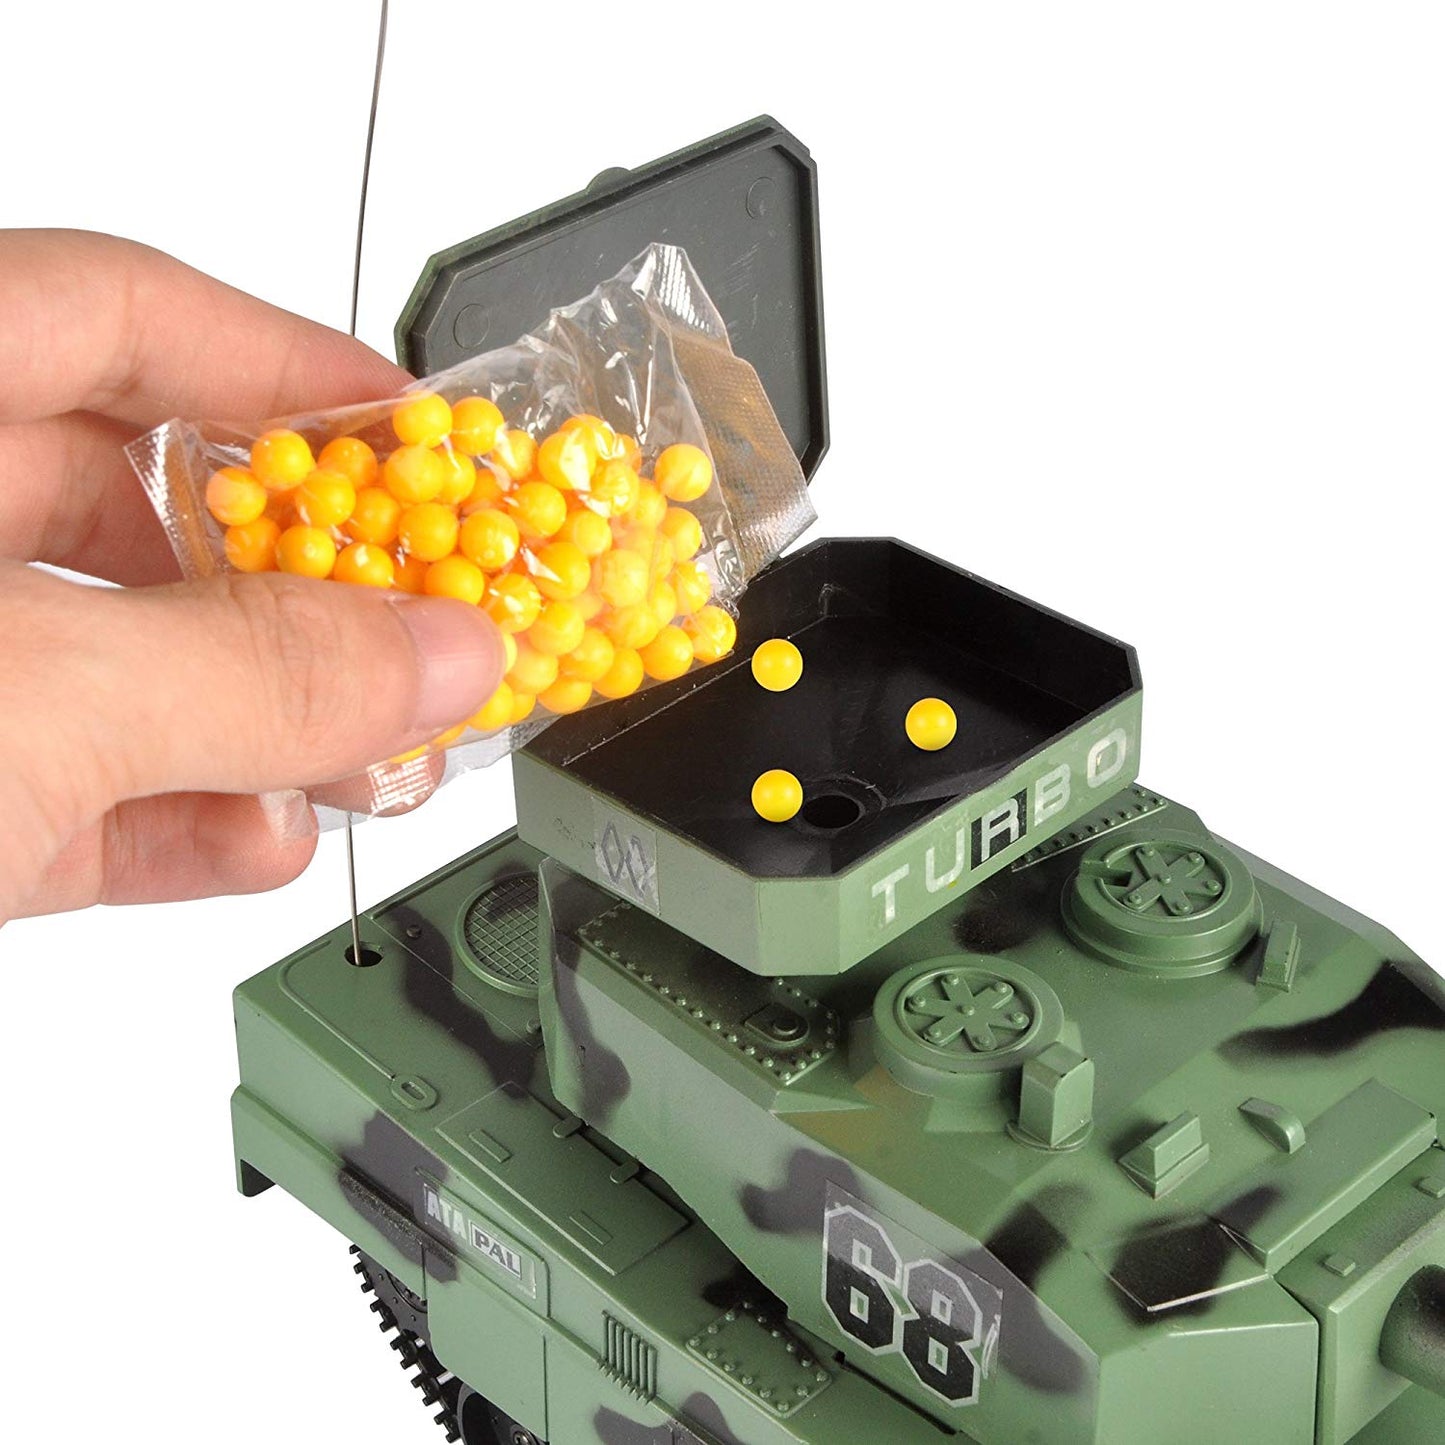 RC Power BB Tank Radio Remote Control Military Battle Tank That Shoots Airsoft Bullets